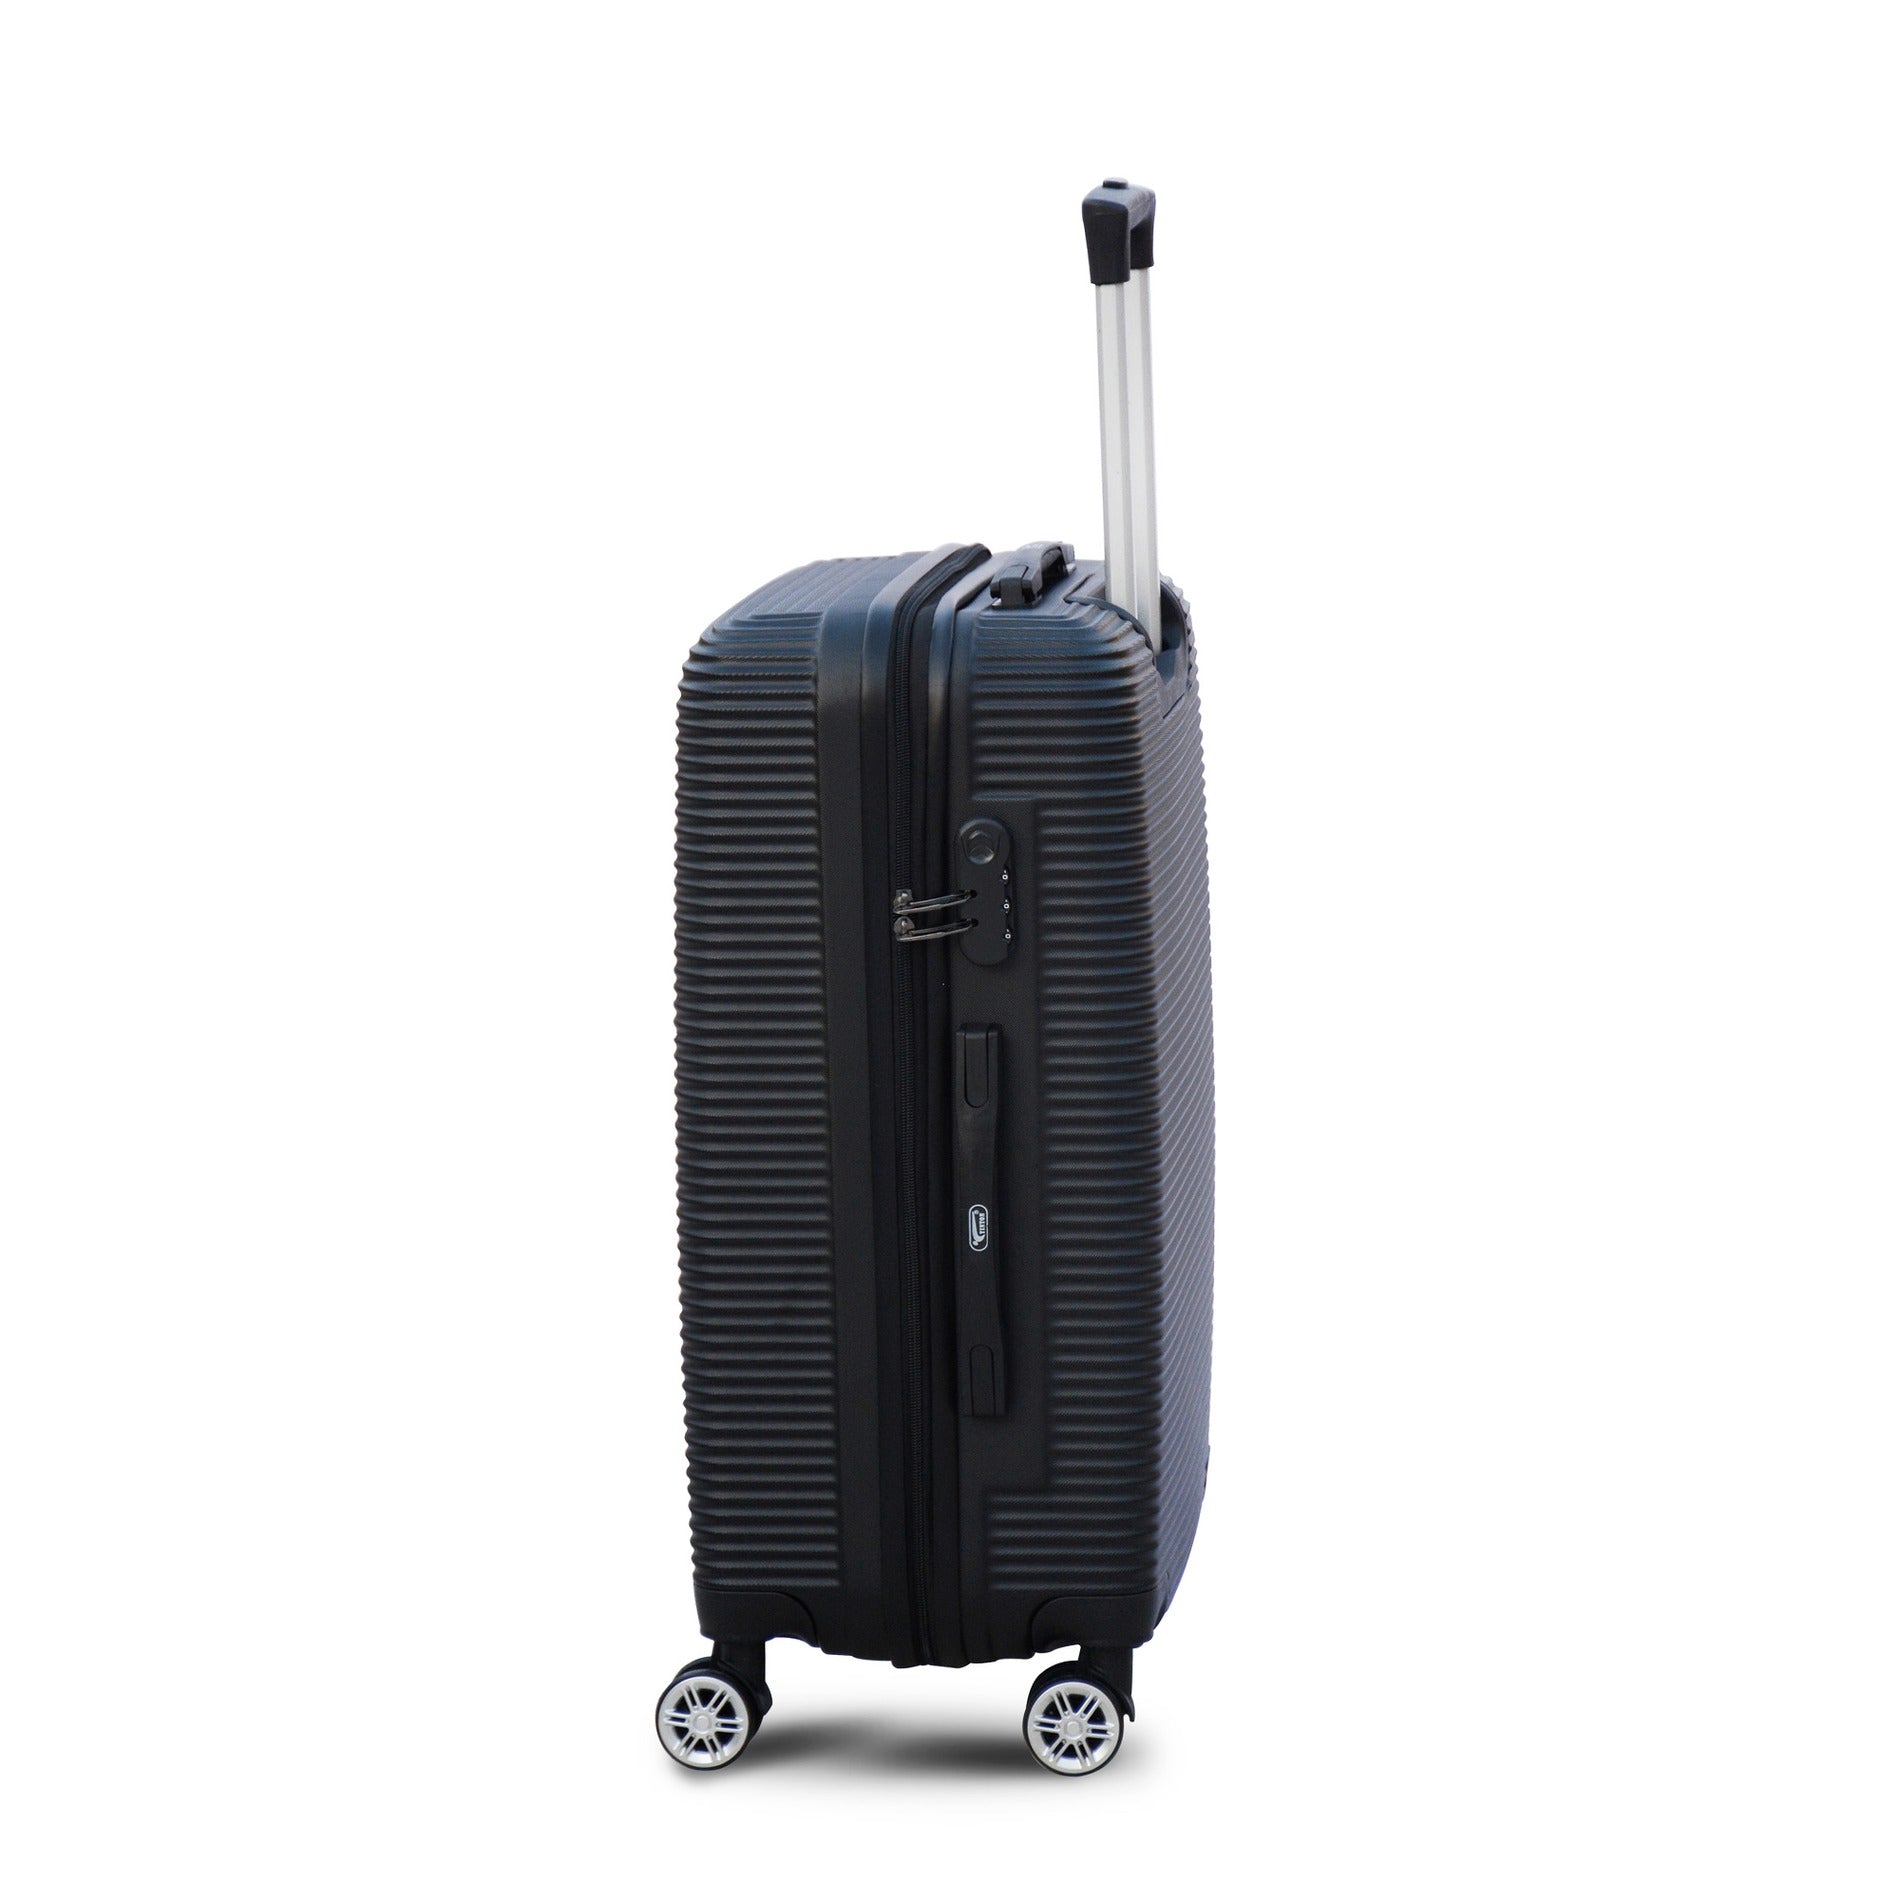 20" Black Colour JIAN ABS Line Luggage Lightweight Hard Case Carry On Trolley Bag With Spinner Wheel